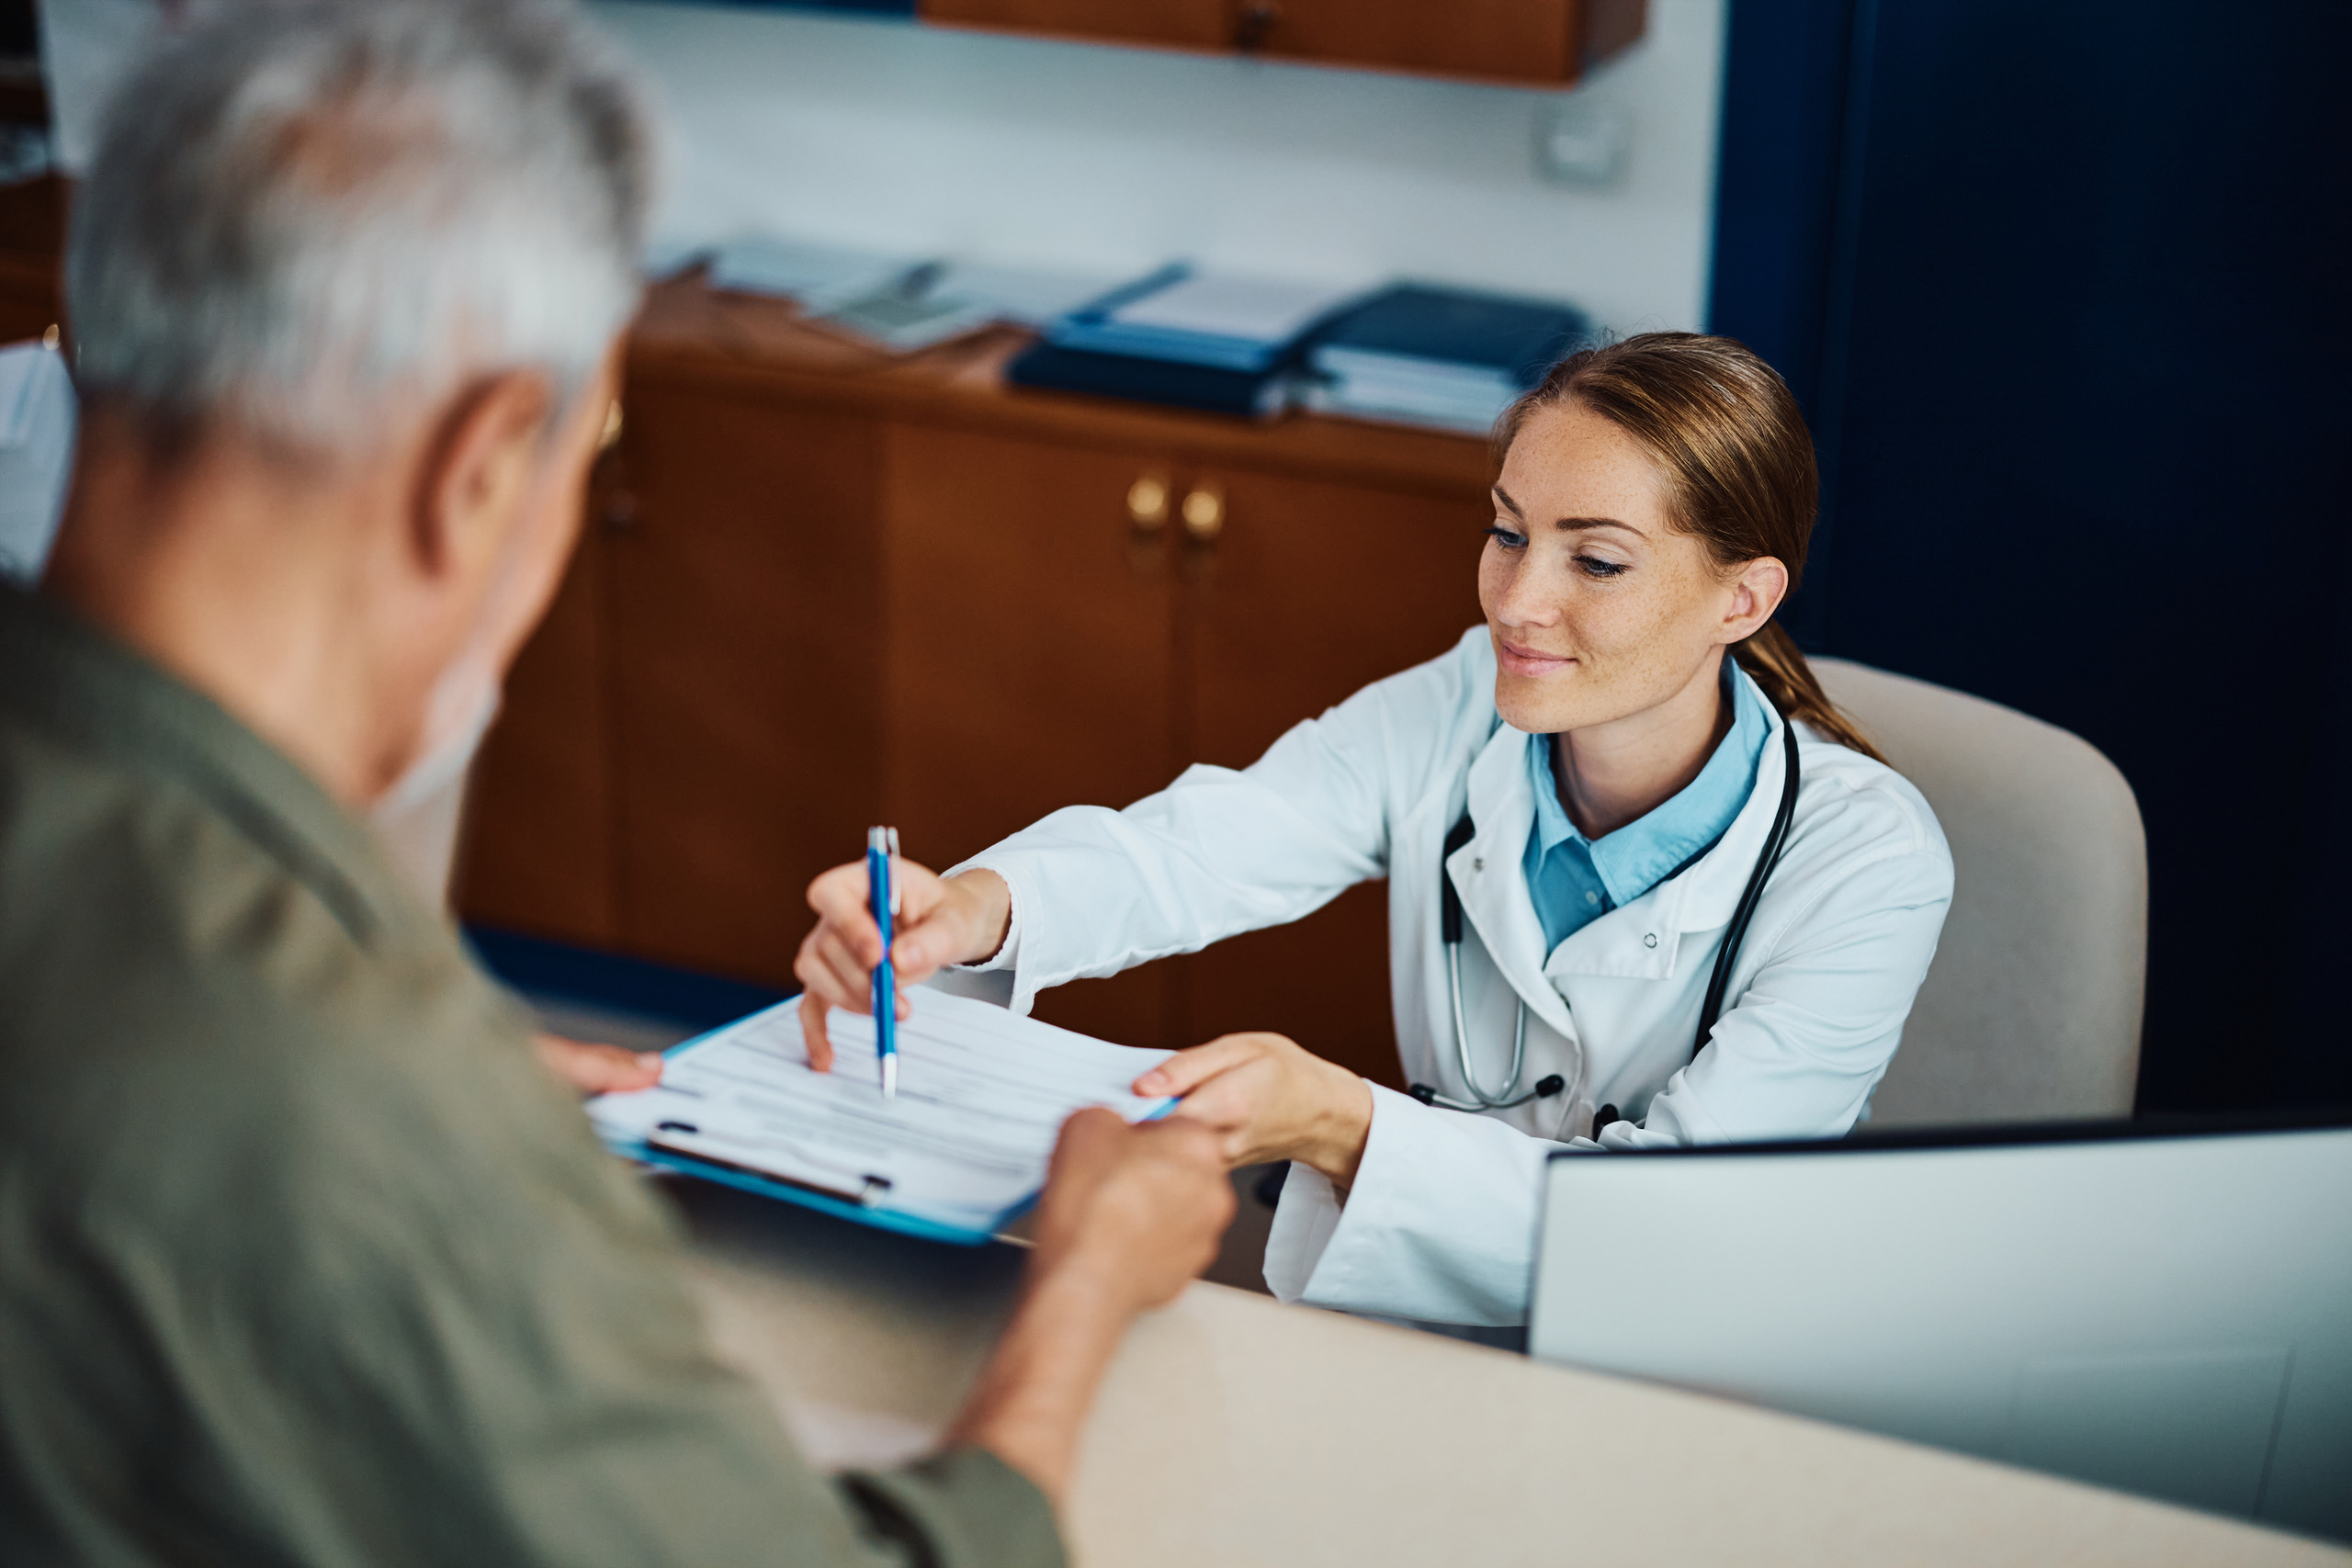 A doctor informs a patient about their COBRA insurance rights during a doctor's visit.